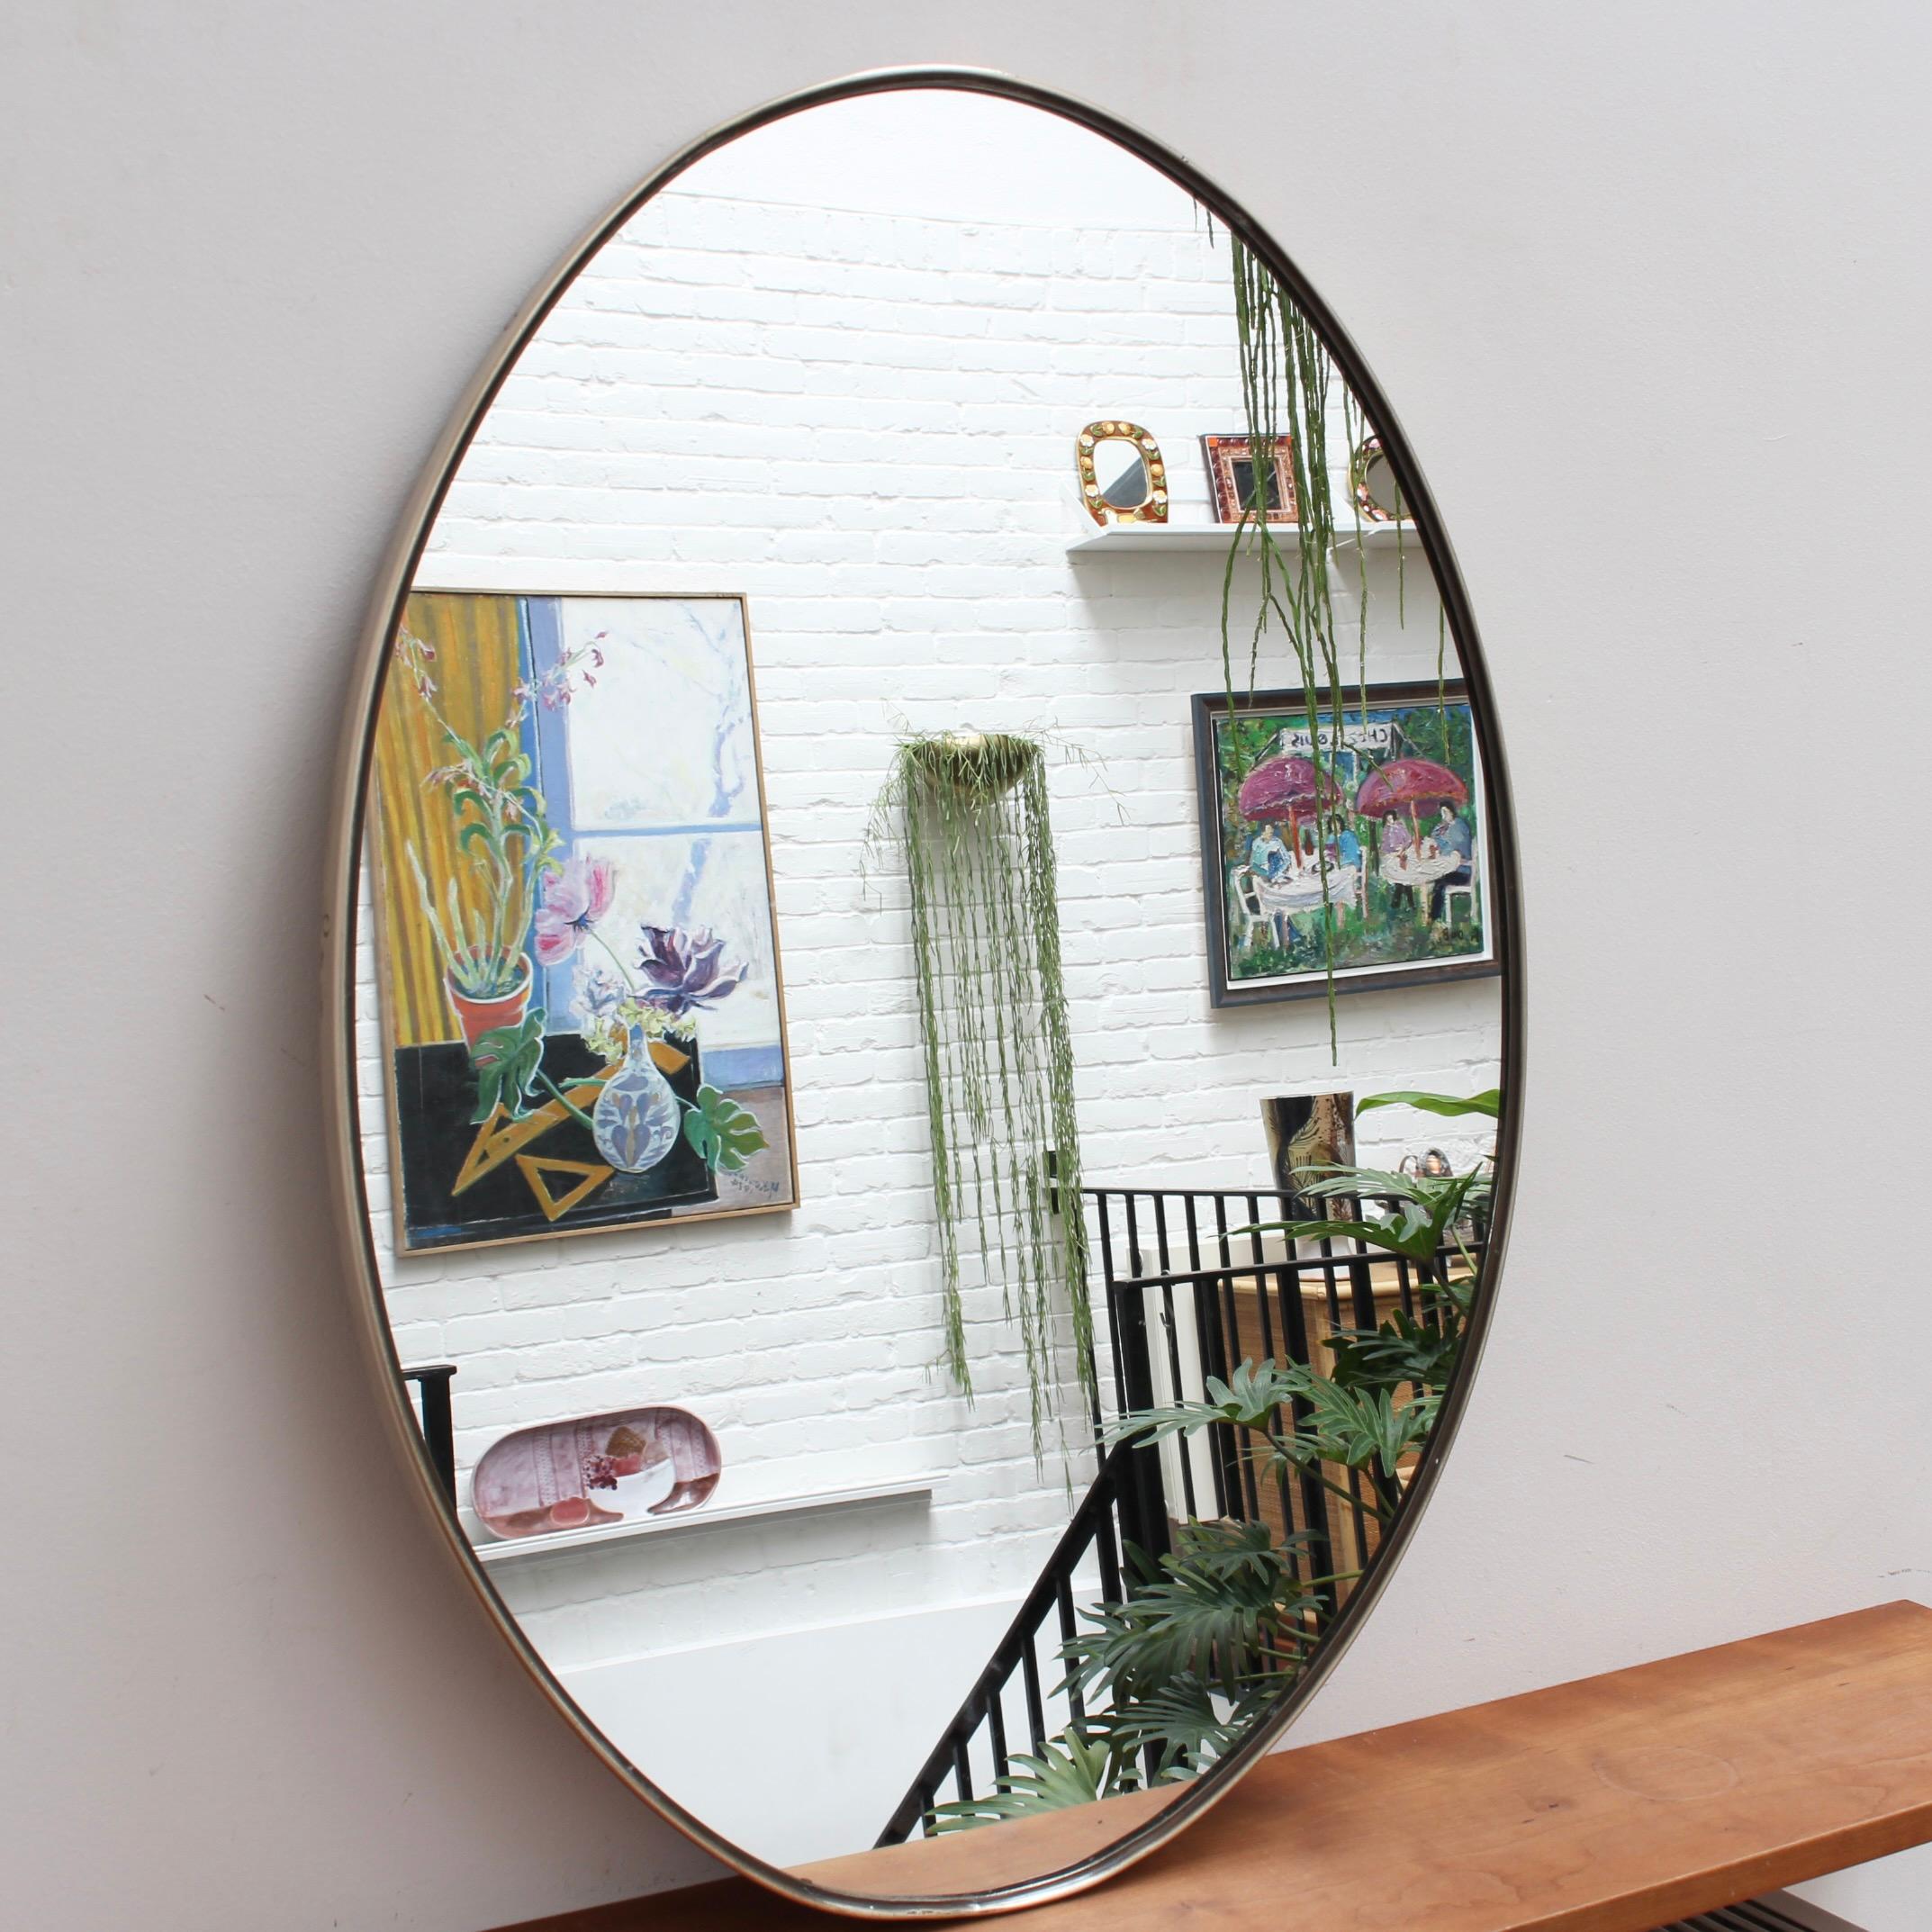 Mid-century Italian wall mirror with brass frame, circa 1950s. The mirror is oval in shape and very smart with rugged durability. The visual impression is elegant and very distinctive in a modern Gio Ponti style. In overall good condition with minor